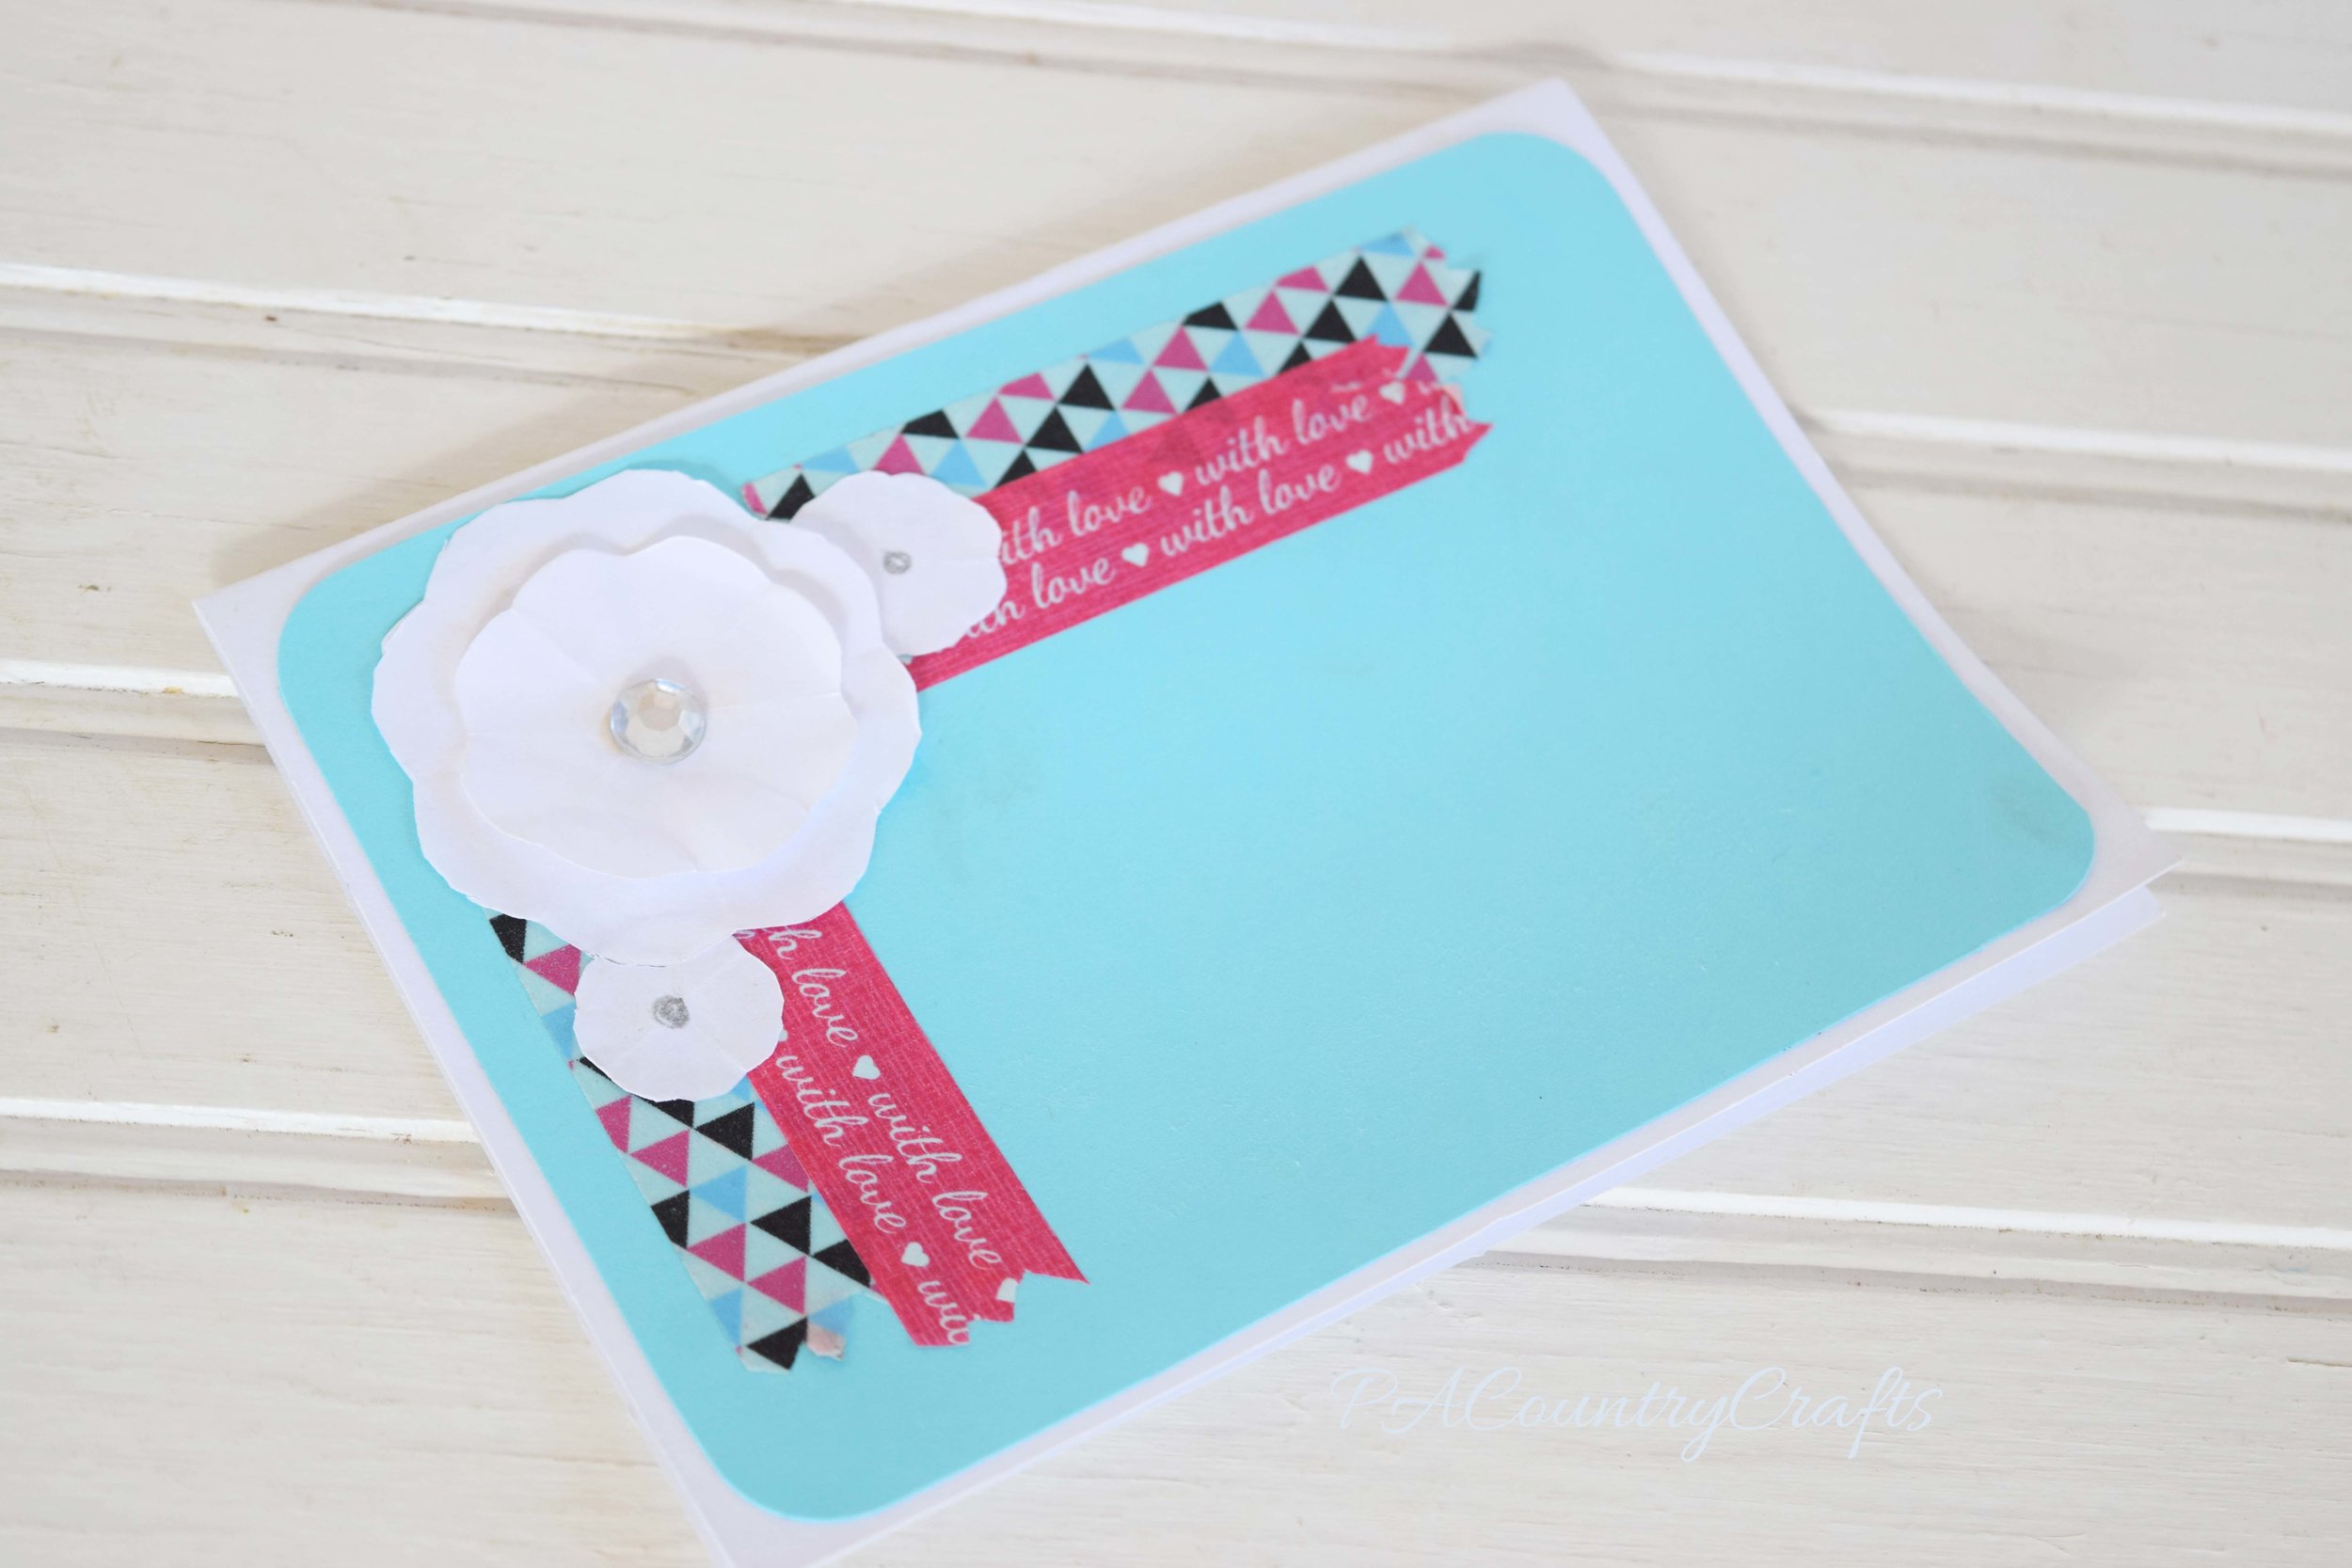 Cute flower embellishment on a blank card with washi tape!